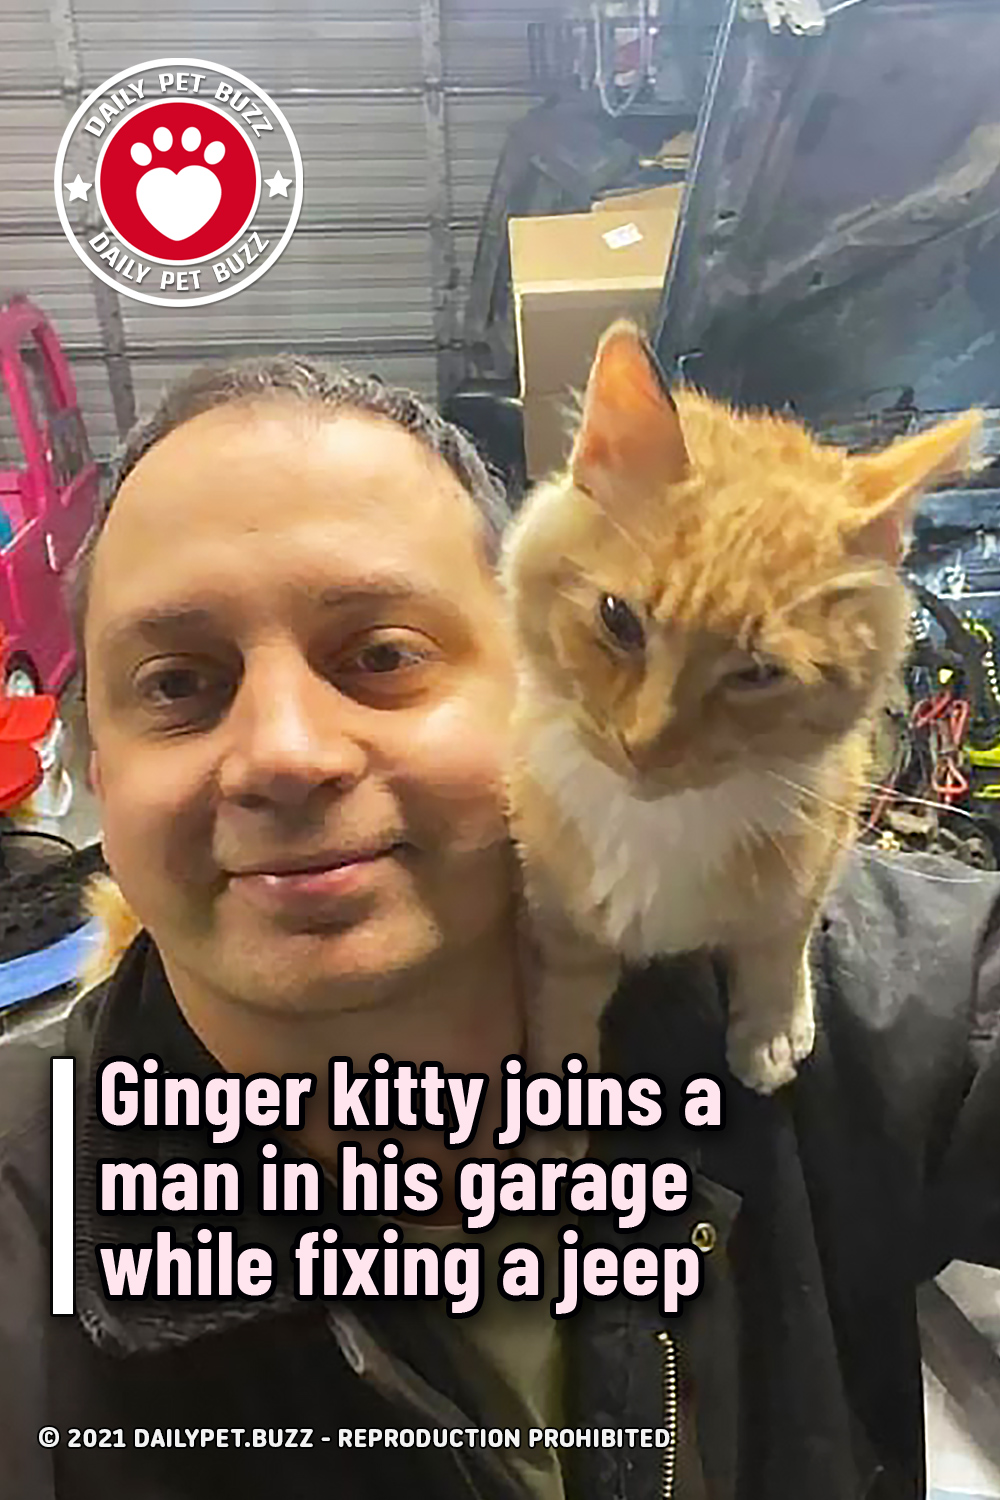 Ginger kitty joins a man in his garage while fixing a jeep